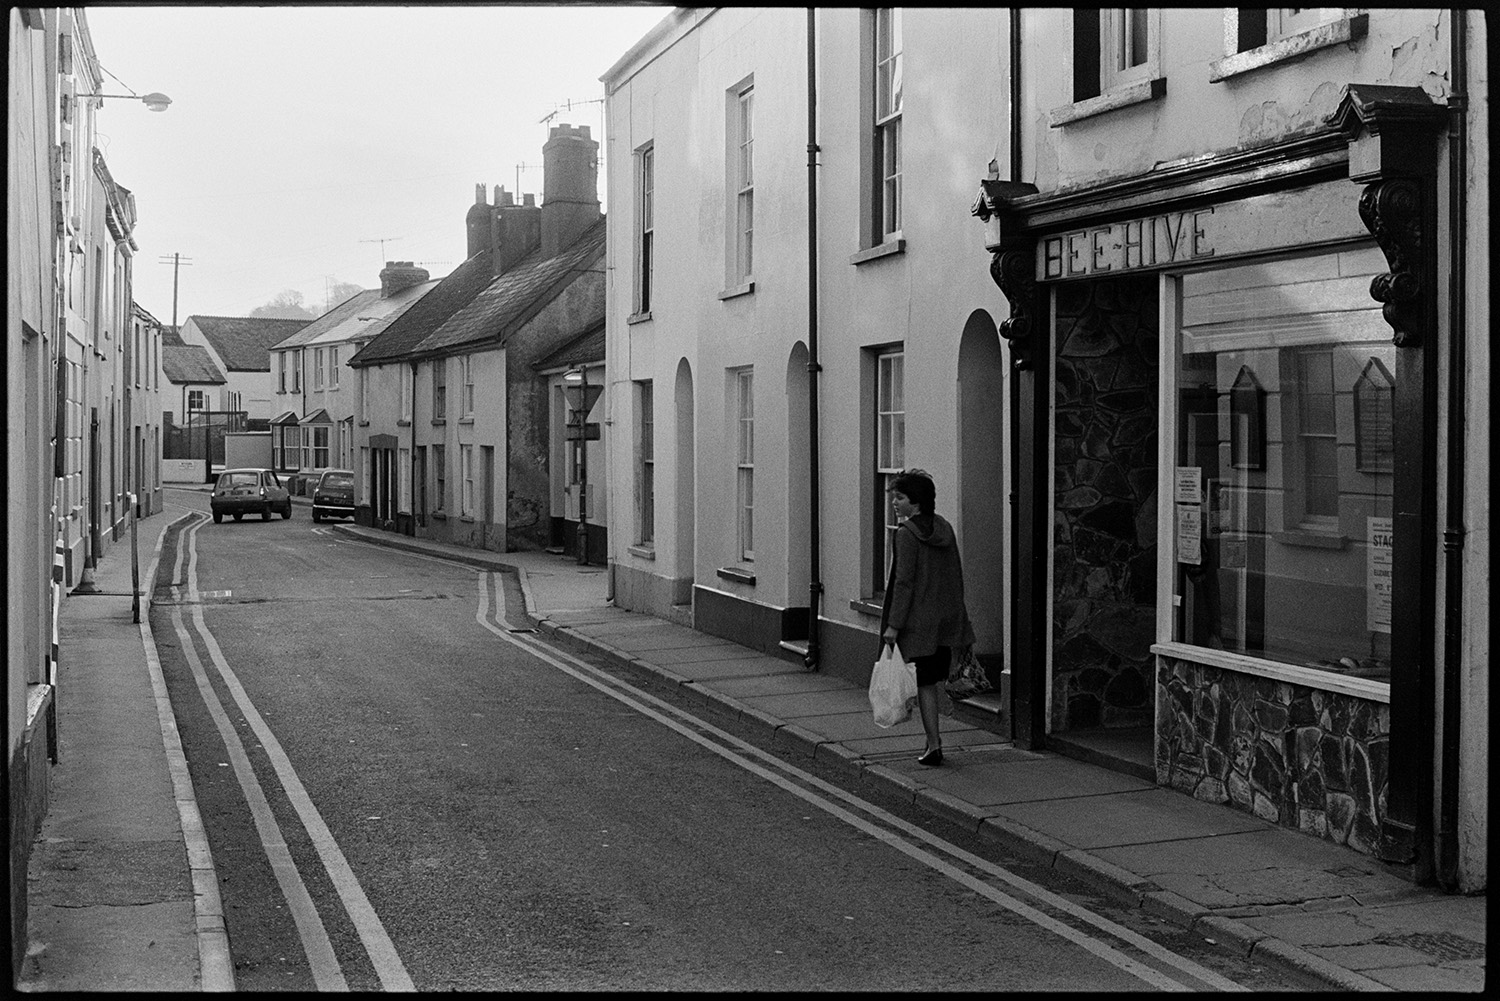 Street scenes with butcher, baker and pub front with sign. 
[A woman walking past the shop front of 'Bee-Hive' in Bideford. Houses and cars can be seen further down the street.]